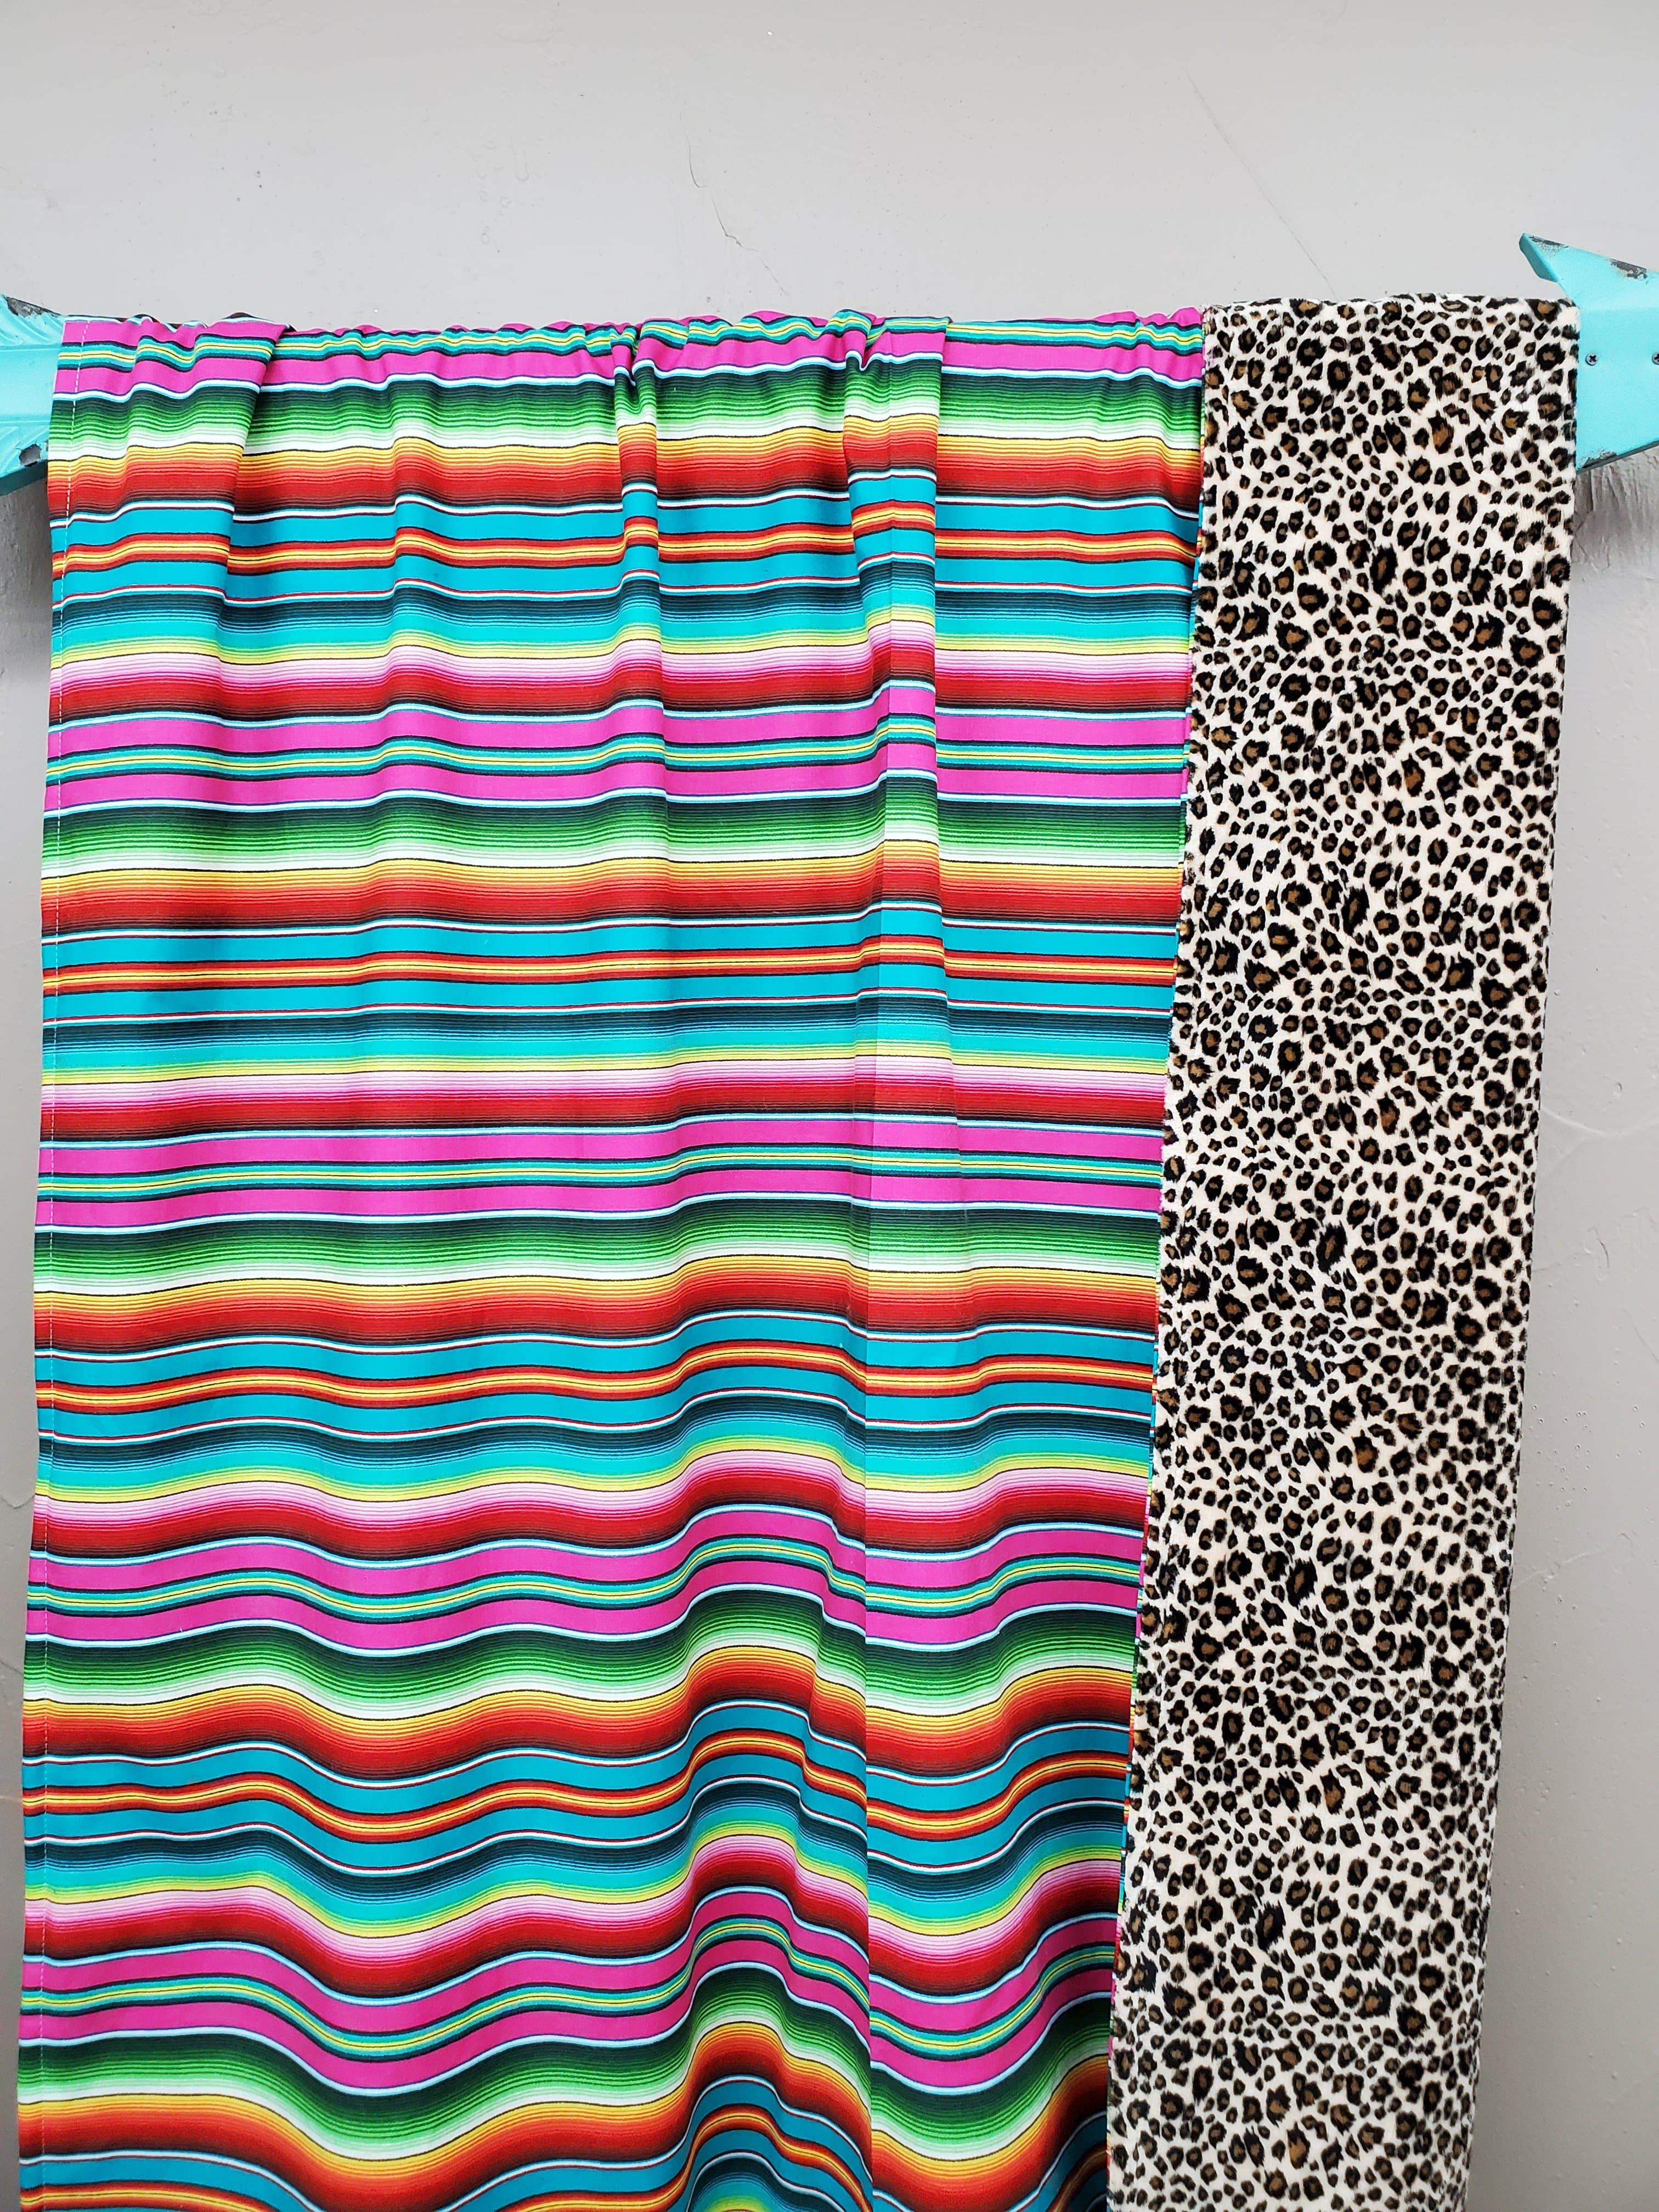 Toddler, Twin, Full, Queen, or King Comforter - Cheetah Minky and Serape